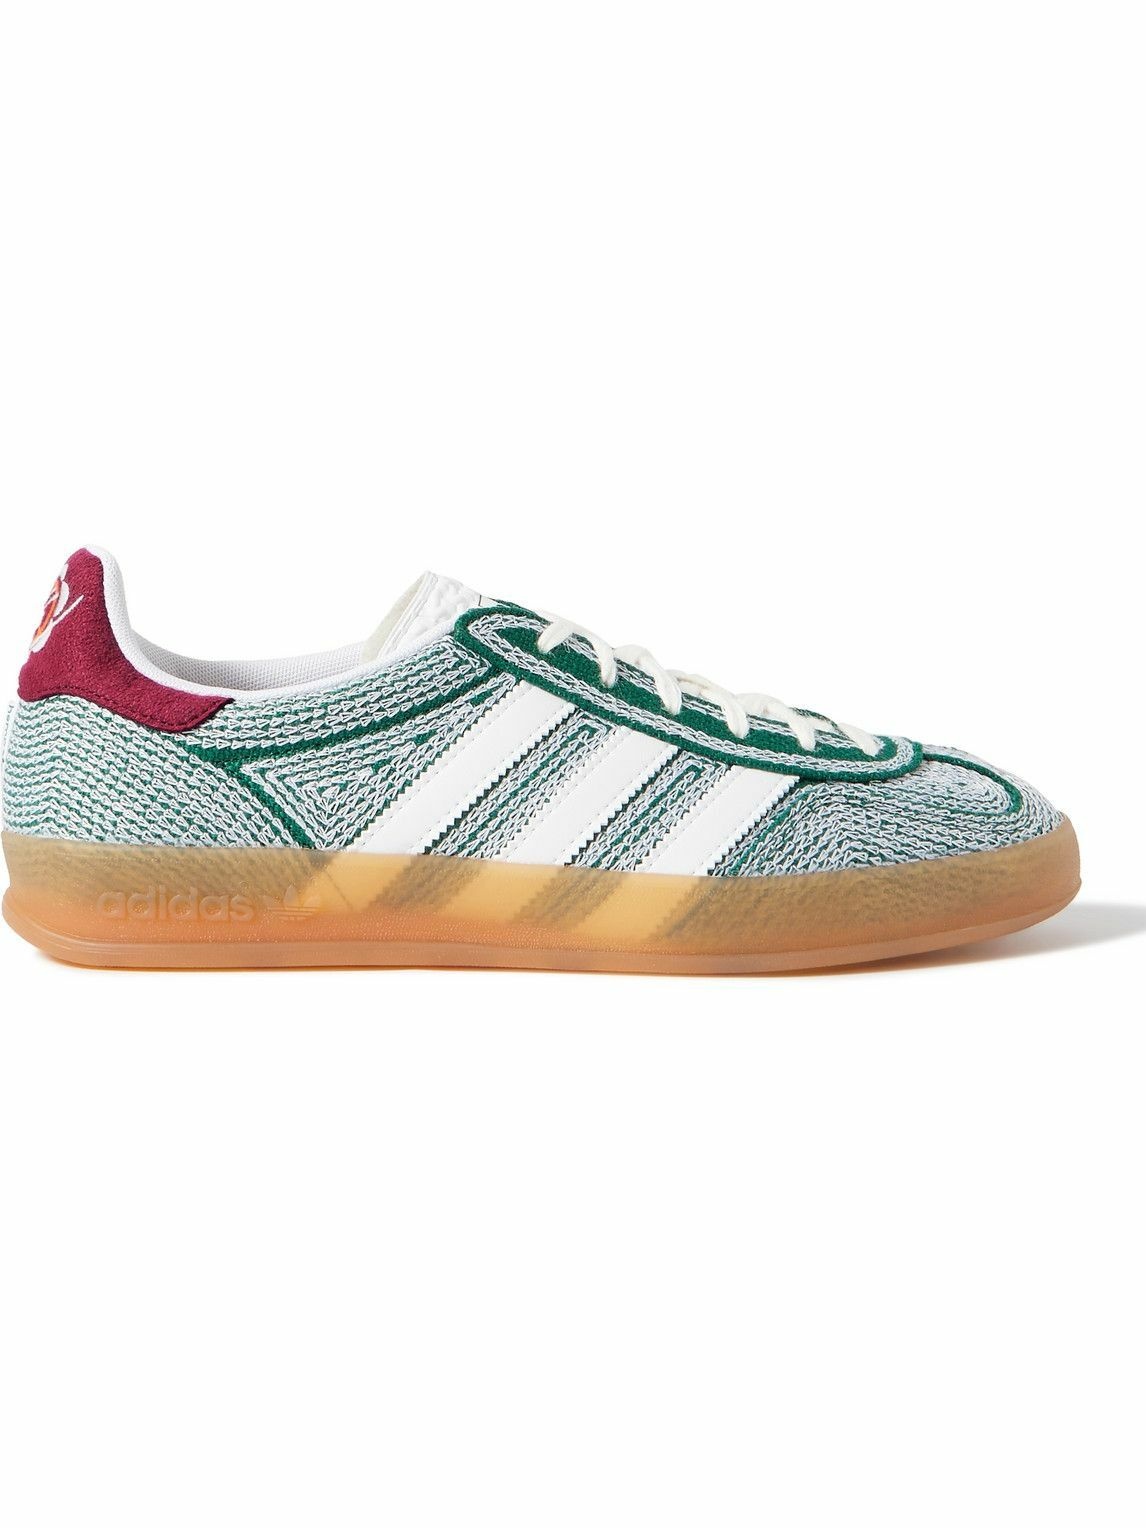 Photo: adidas Originals - Sean Wotherspoon Gazelle Indoor Embroidered Mushroom Leather Sneakers - Multi